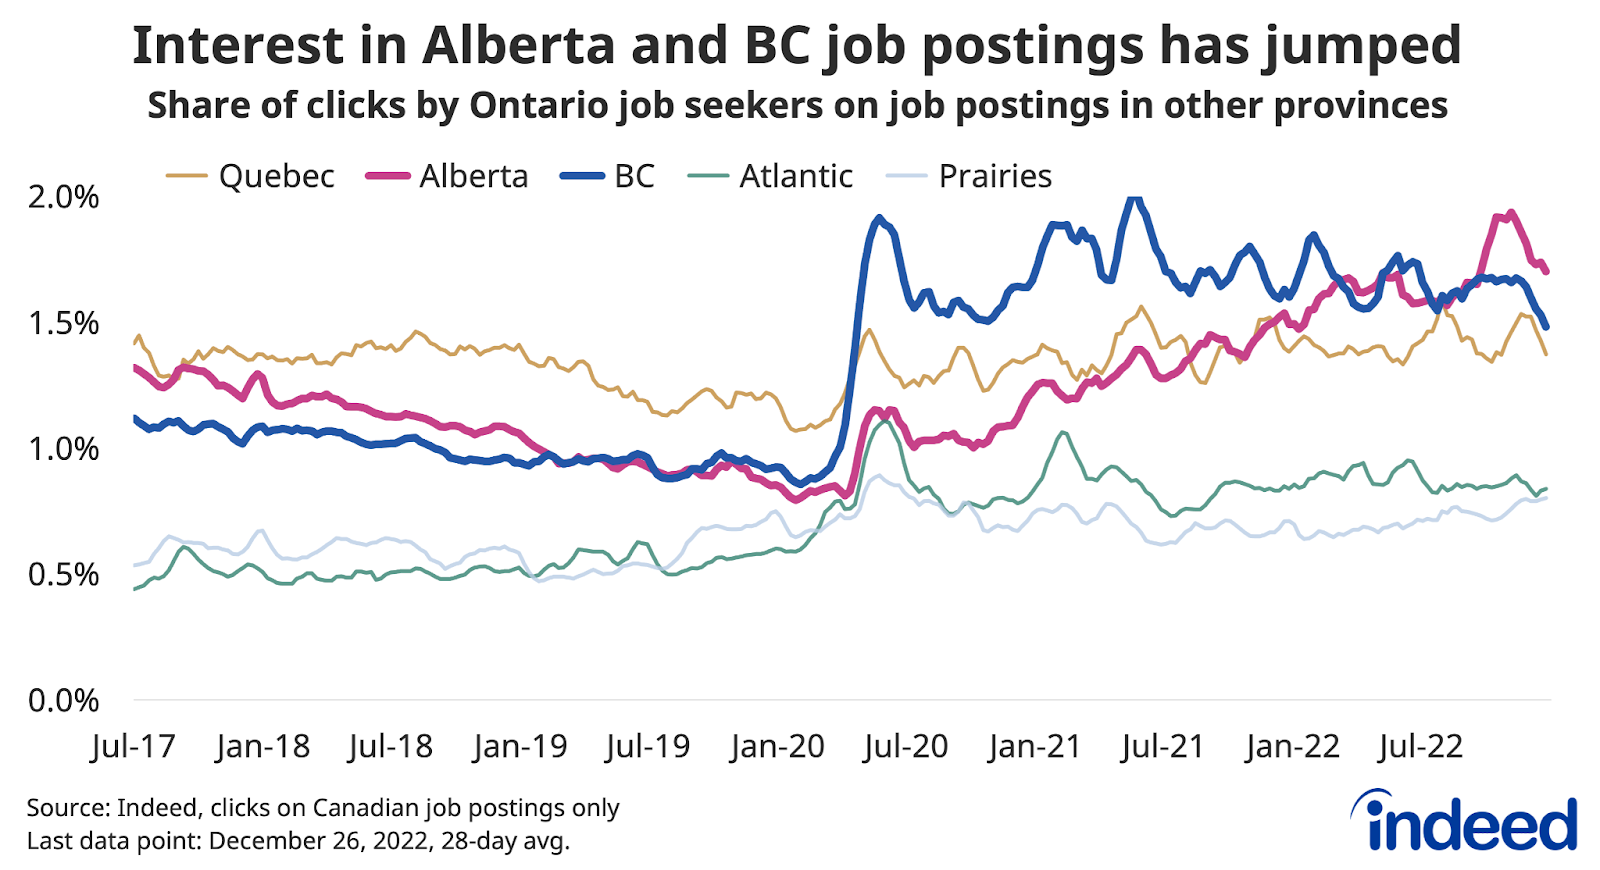 A line chart entitled “Interest in Alberta and BC job postings has jumped” shows the share of clicks by Ontario job seekers on job postings in different provinces between July 2017 and December 2022.